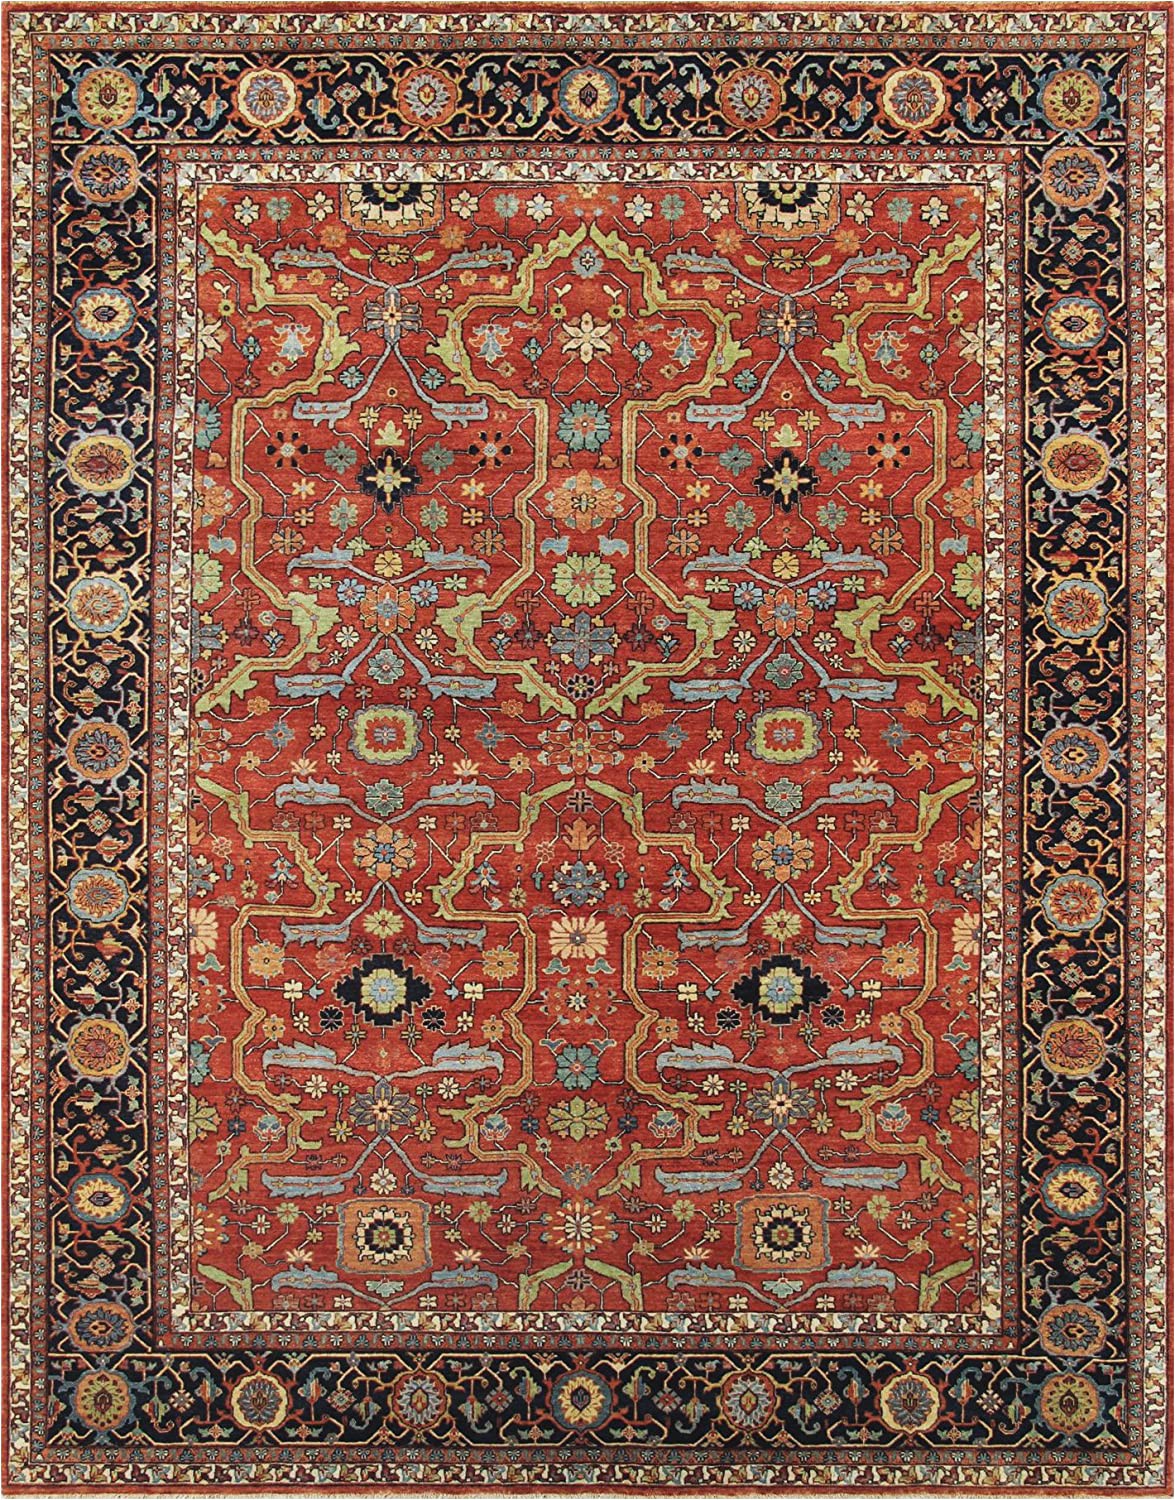 11 by 13 area Rugs Amazon Pasargad Carpets Ferehan Knotted Wool area Rug 9